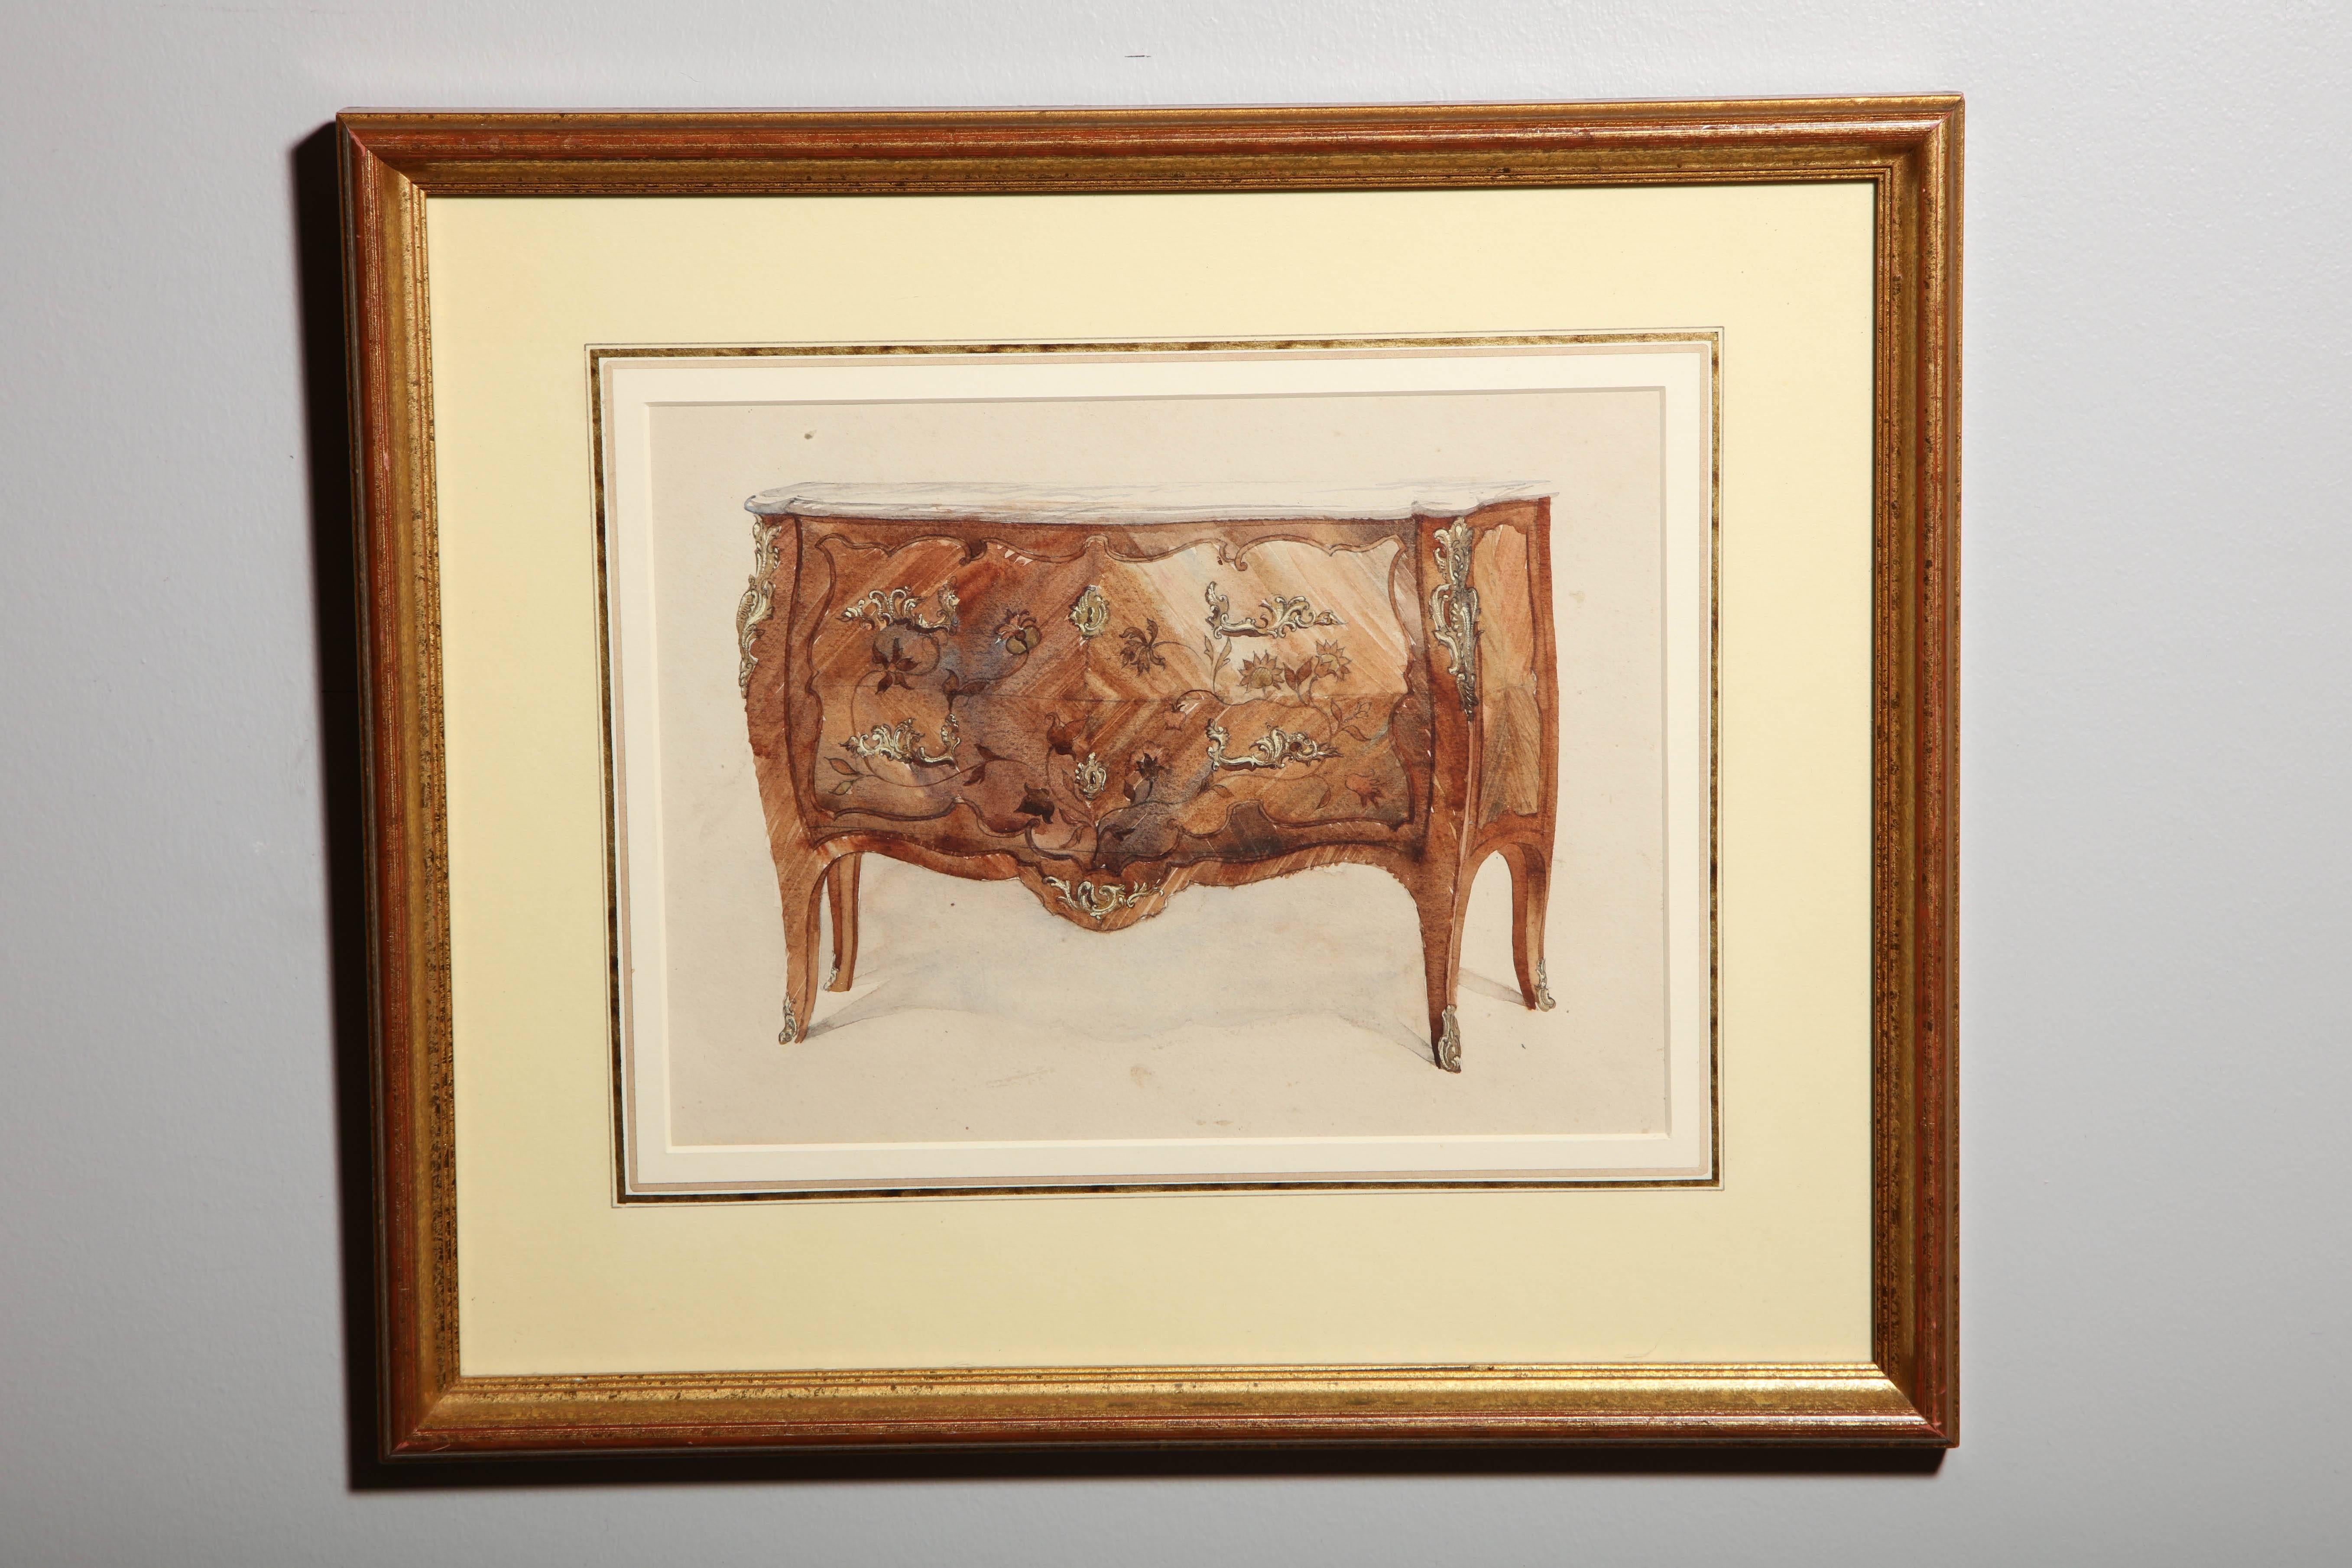 A collection can make a big impact in a space, and this collection of furniture paintings is particularly impressive. Eleven it total, these were created in the 19th century with pen, black ink and watercolors, and depict furniture from different